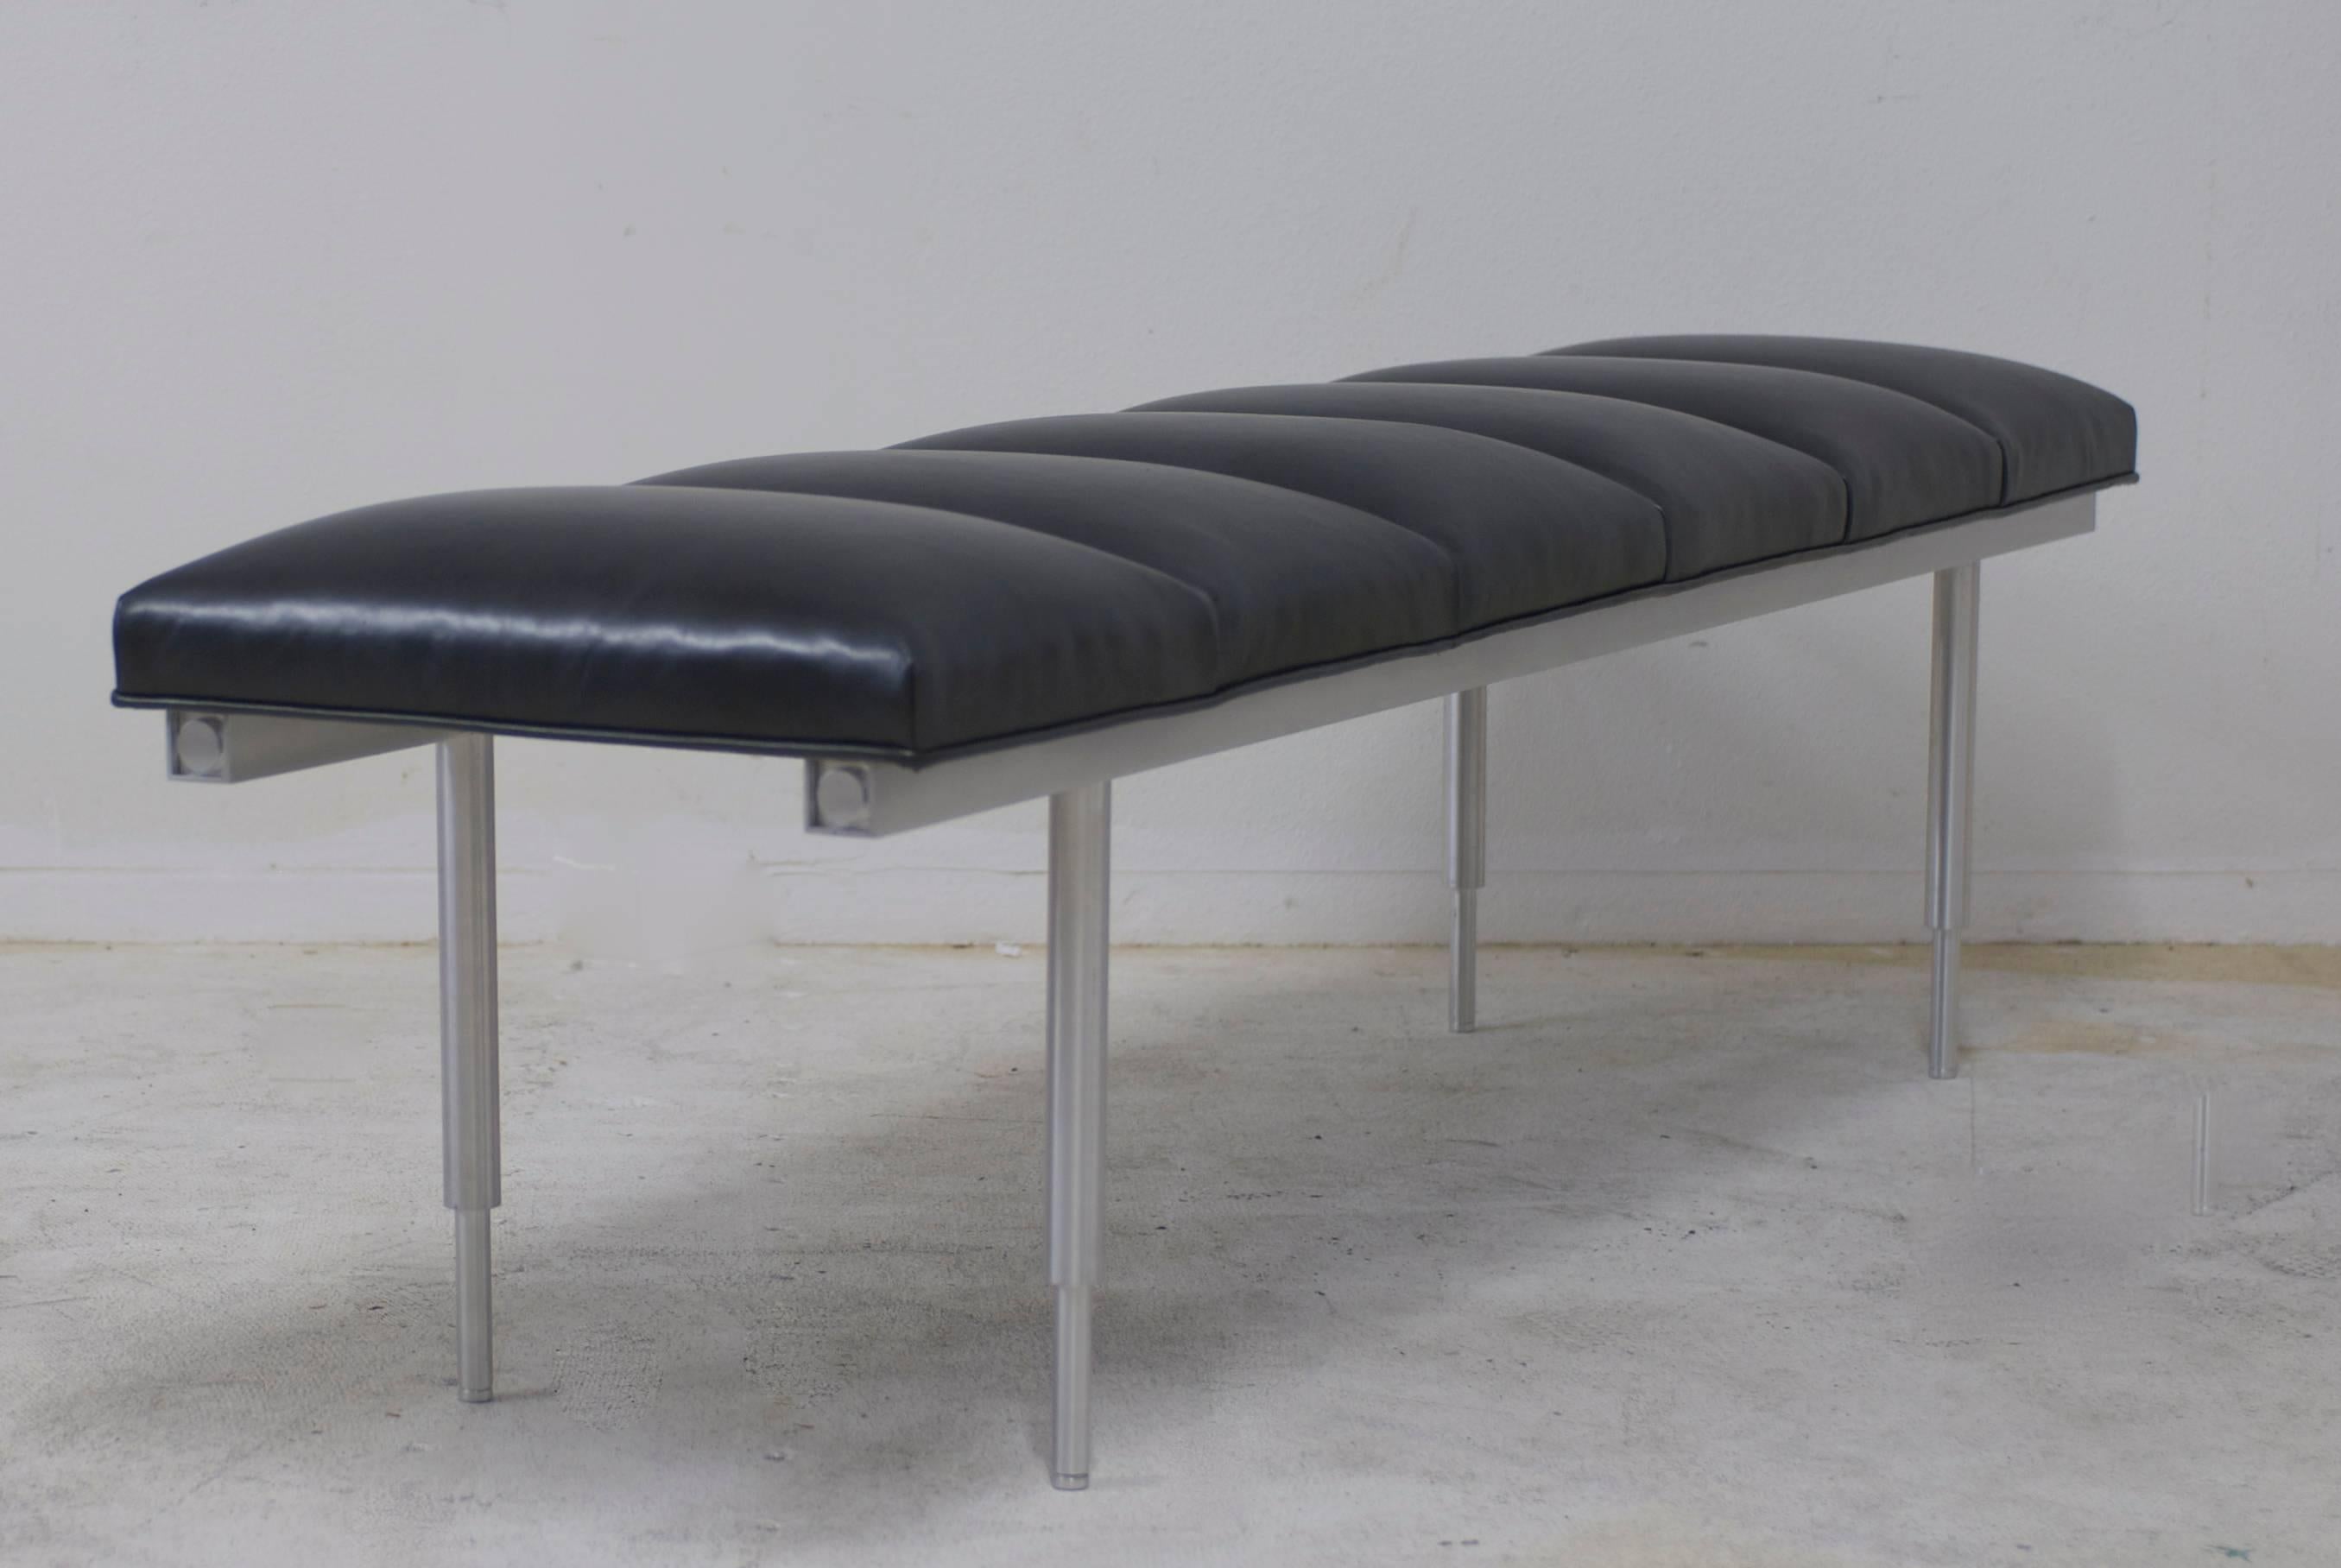  Chanel Tufted Black Leather and Aluminum Bench 2